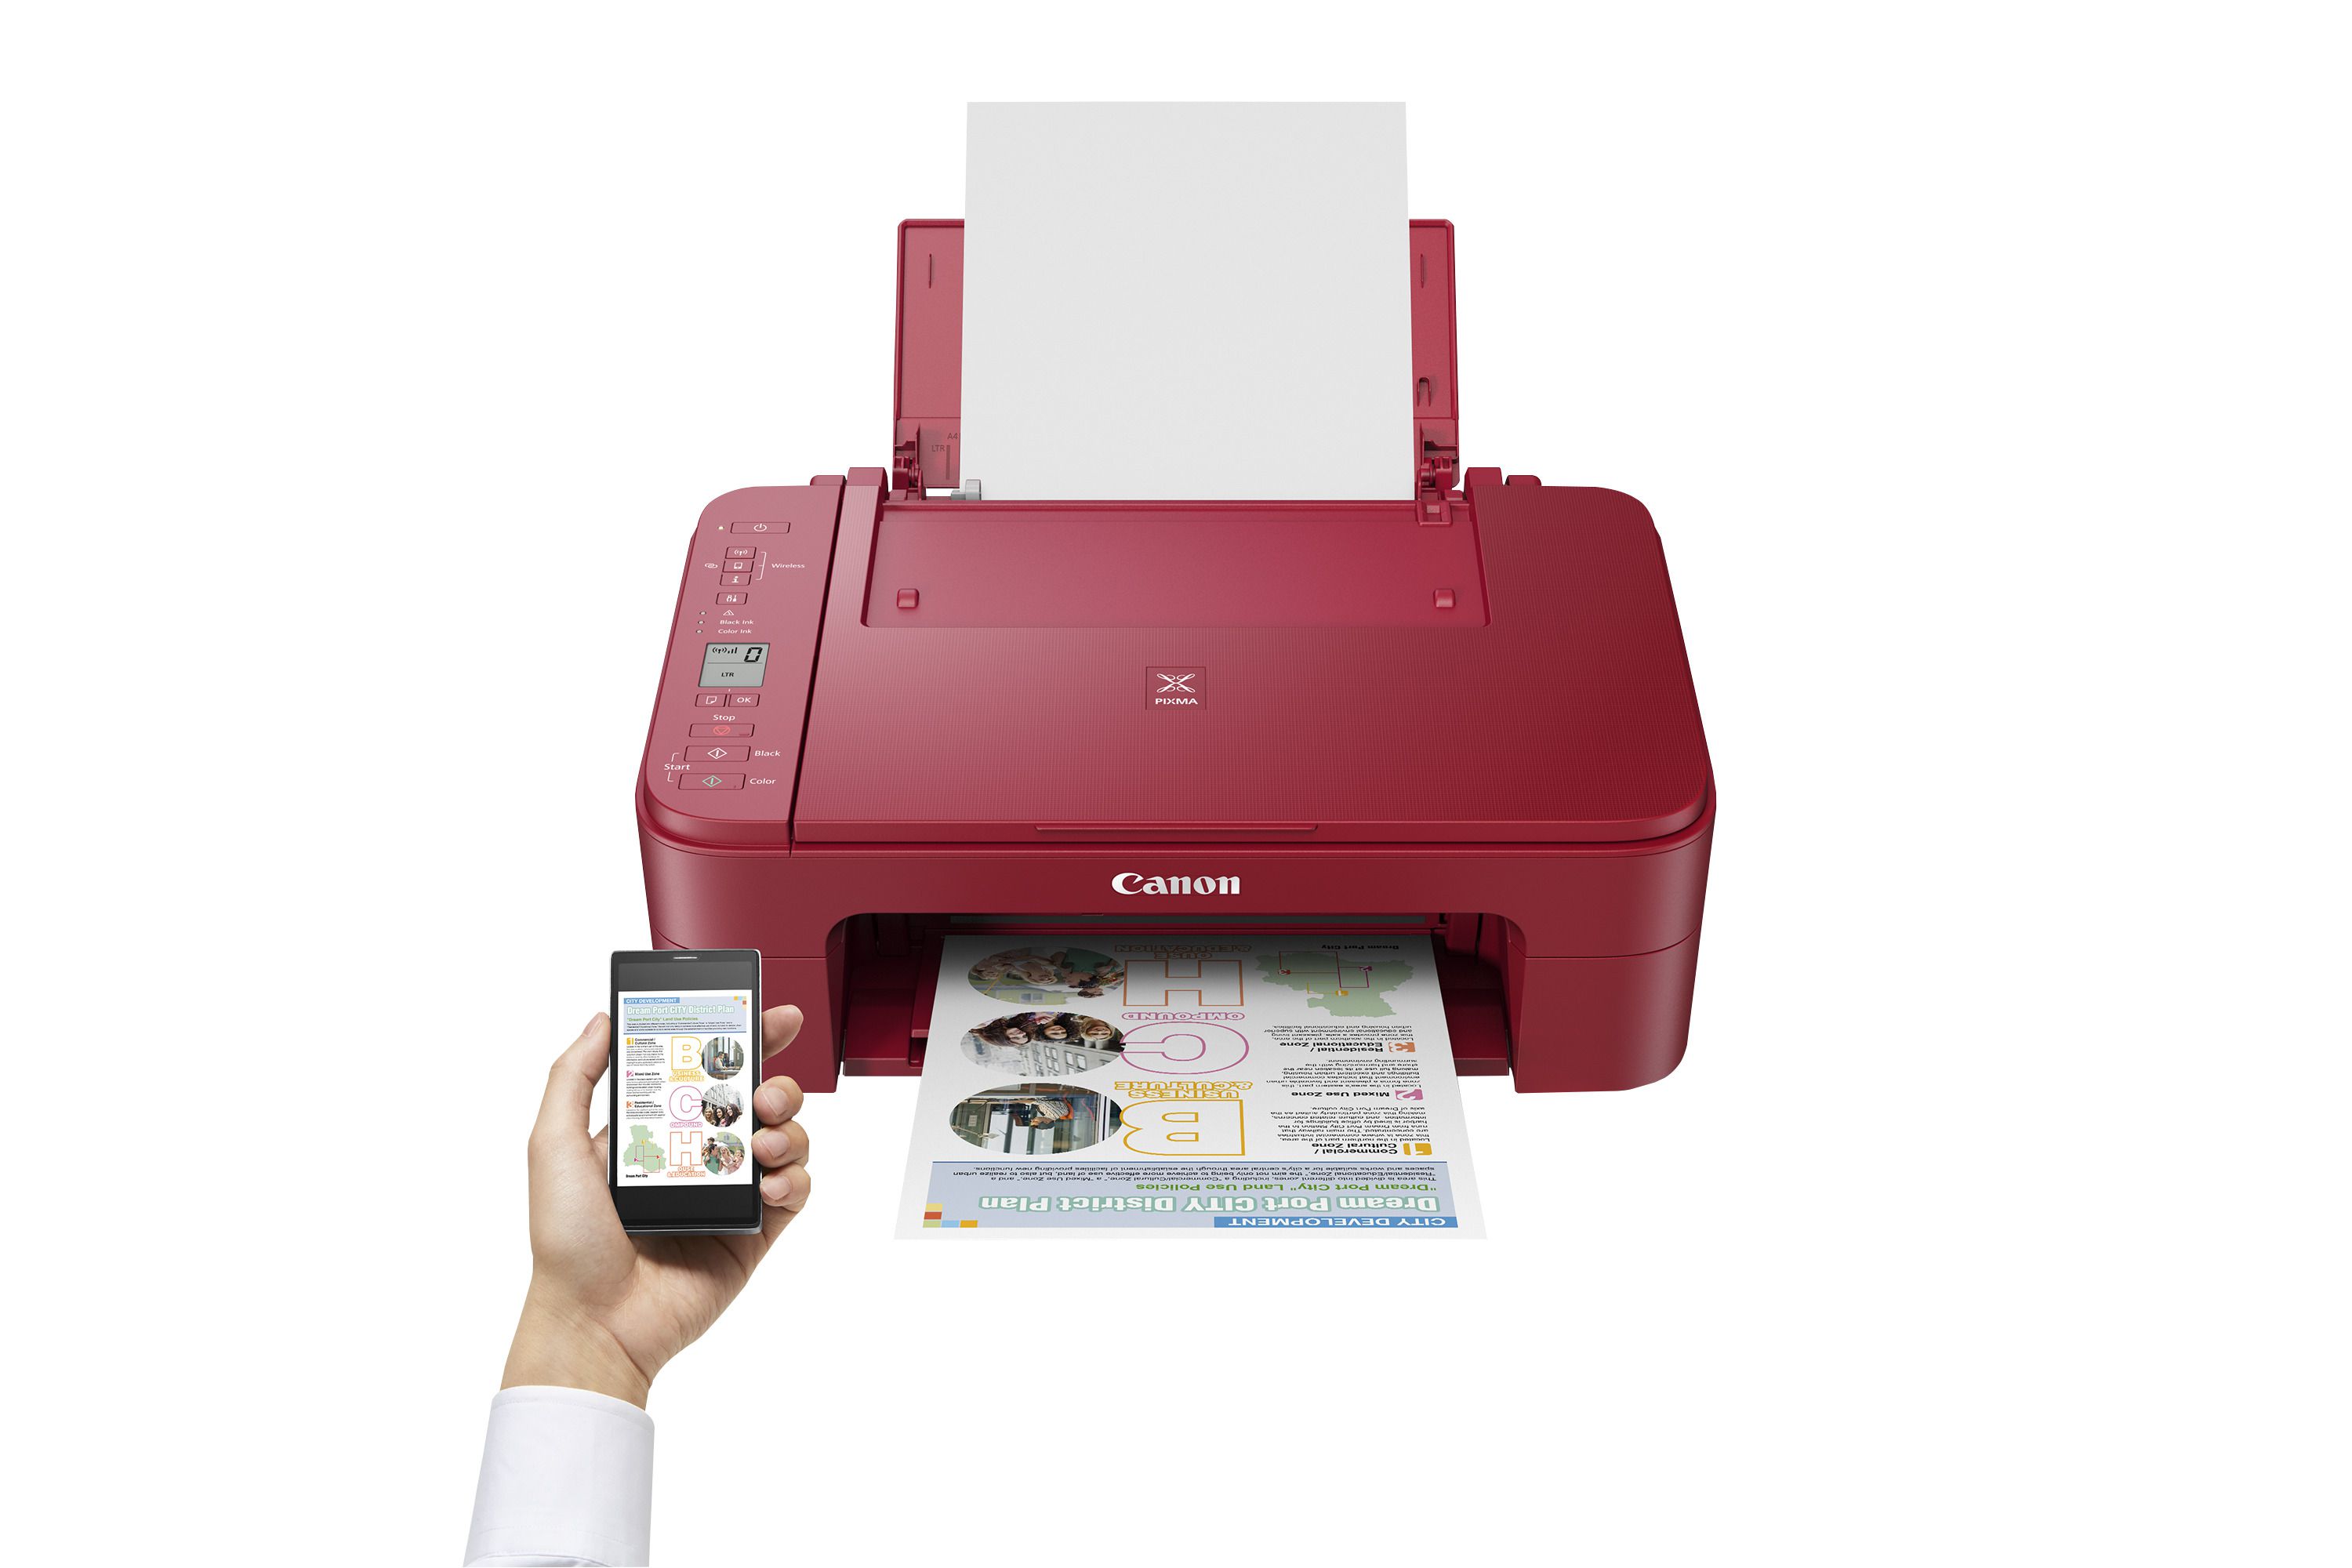 Canon PIXMA engelberger ag - Red TS3352